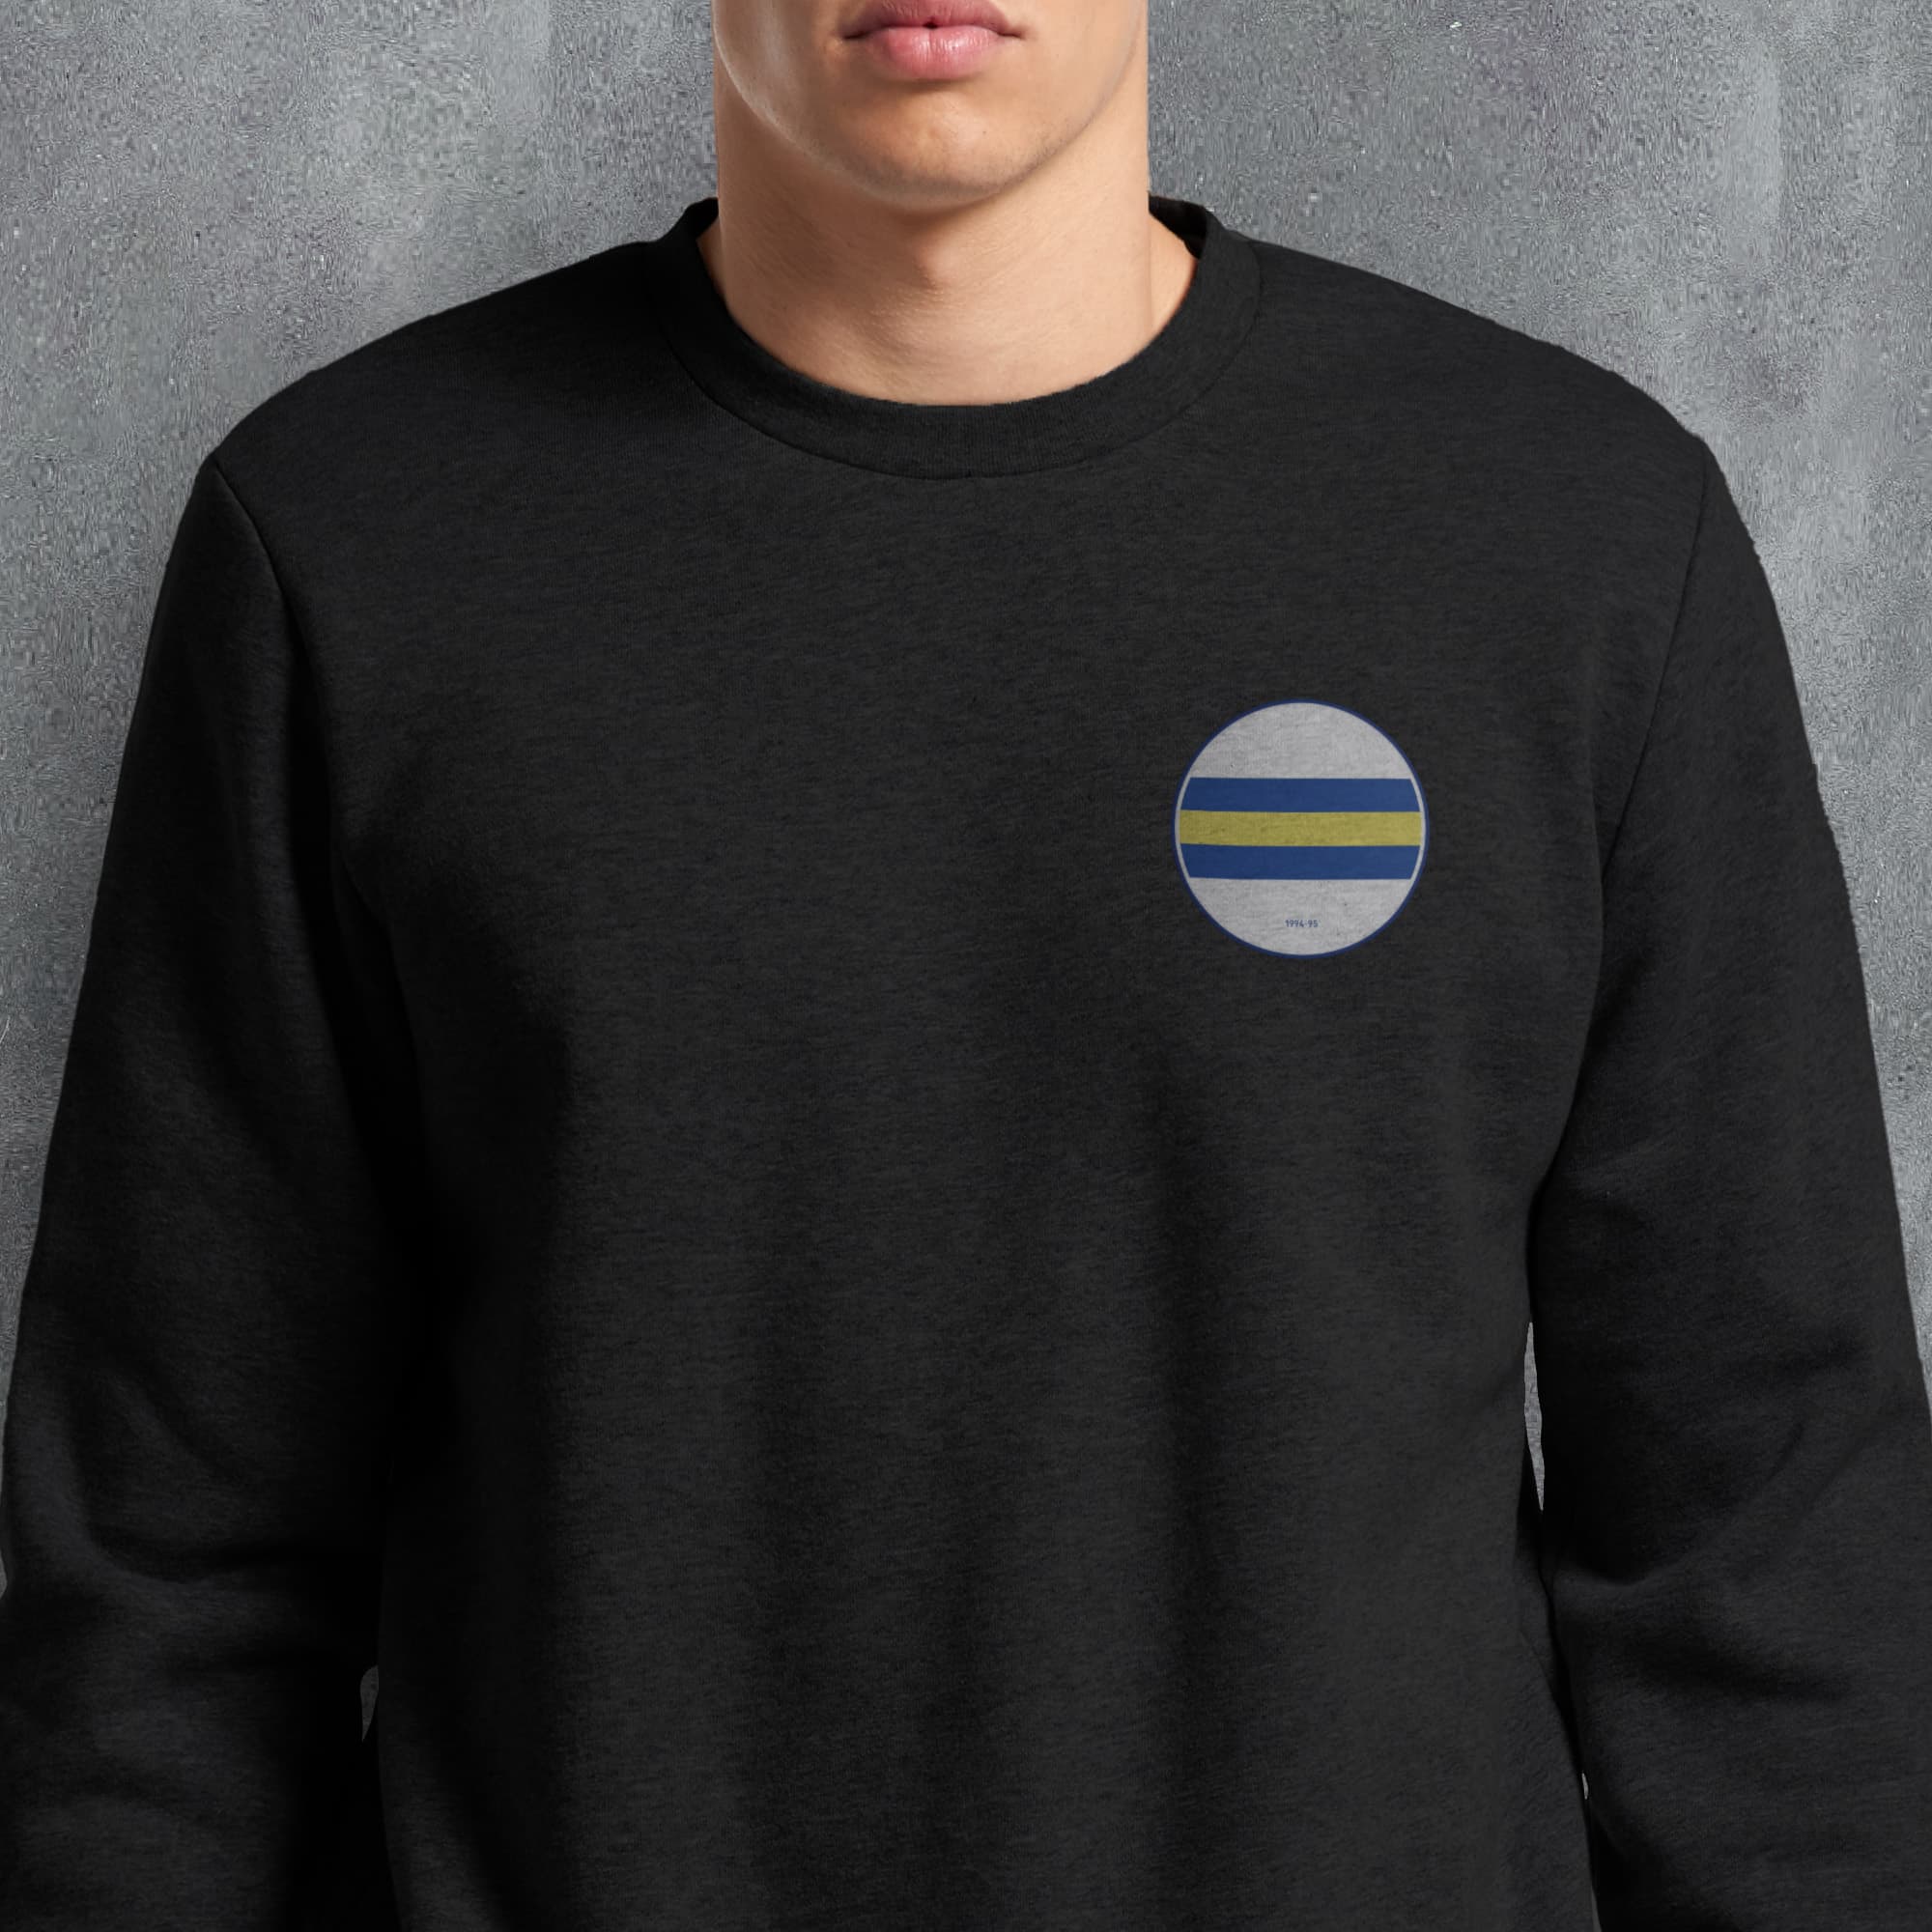 a man wearing a black sweatshirt with a blue, yellow and white stripe on the